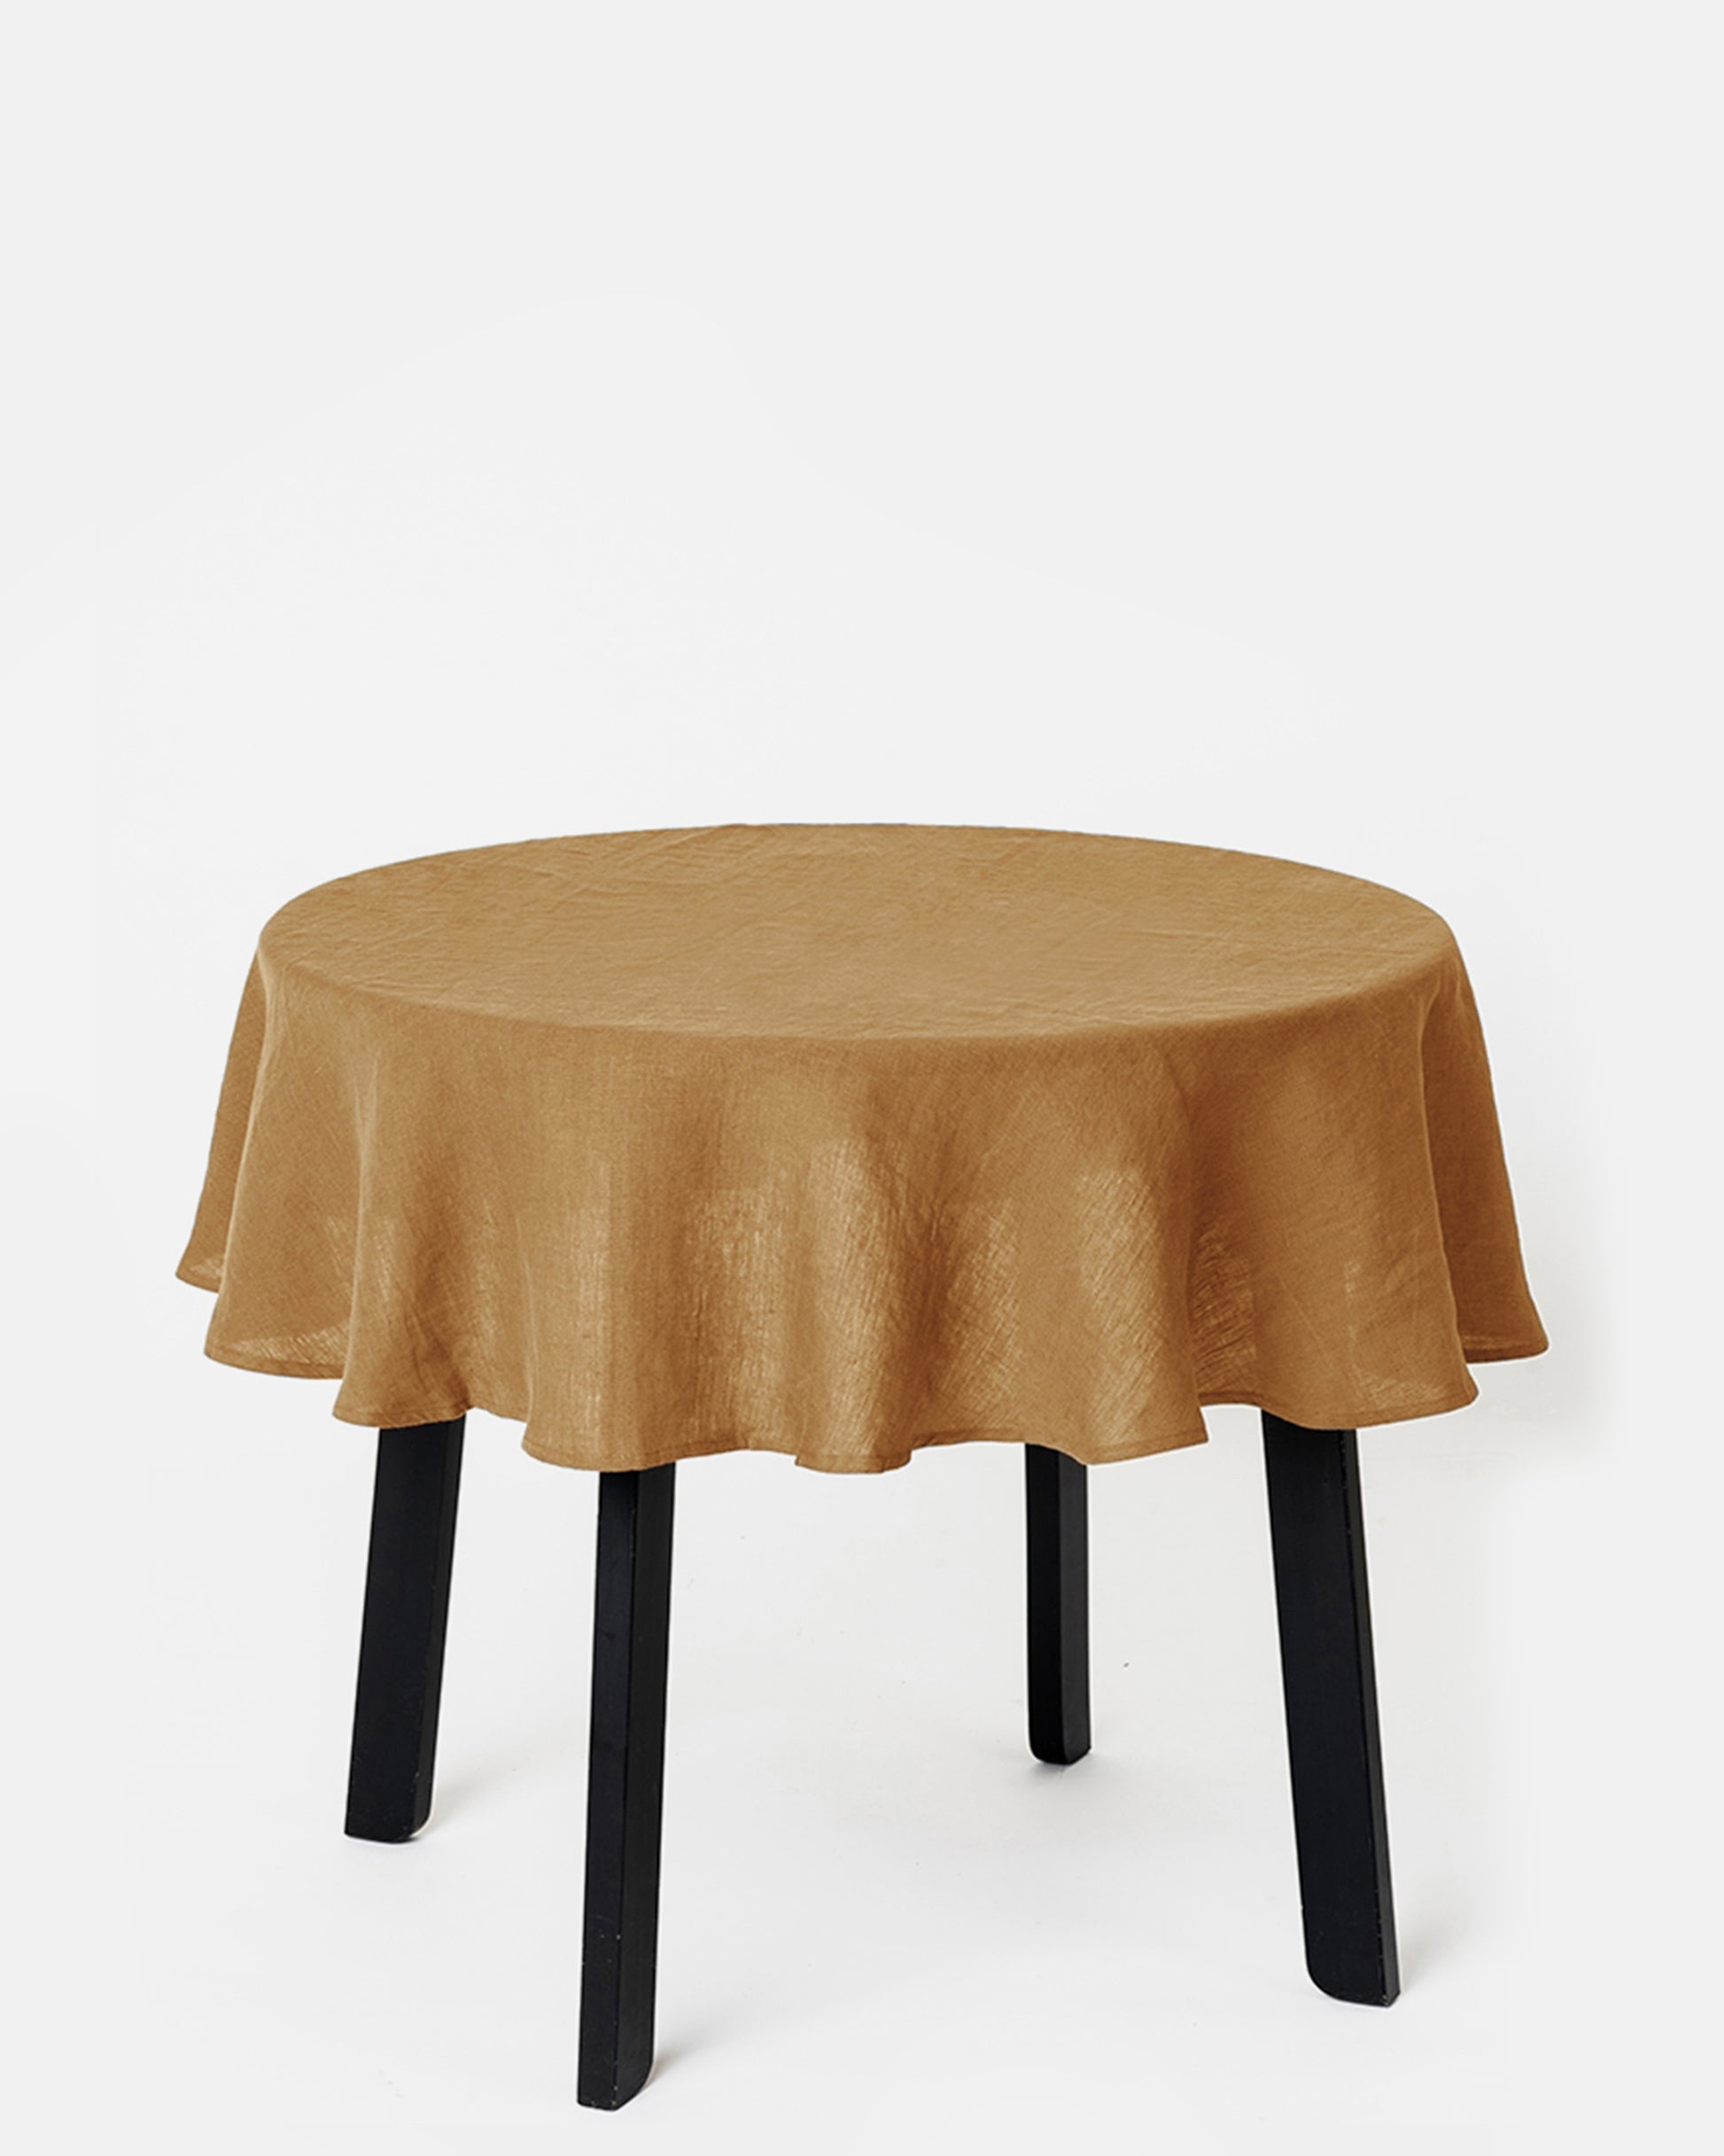 Round linen tablecloth in Tan - MagicLinen